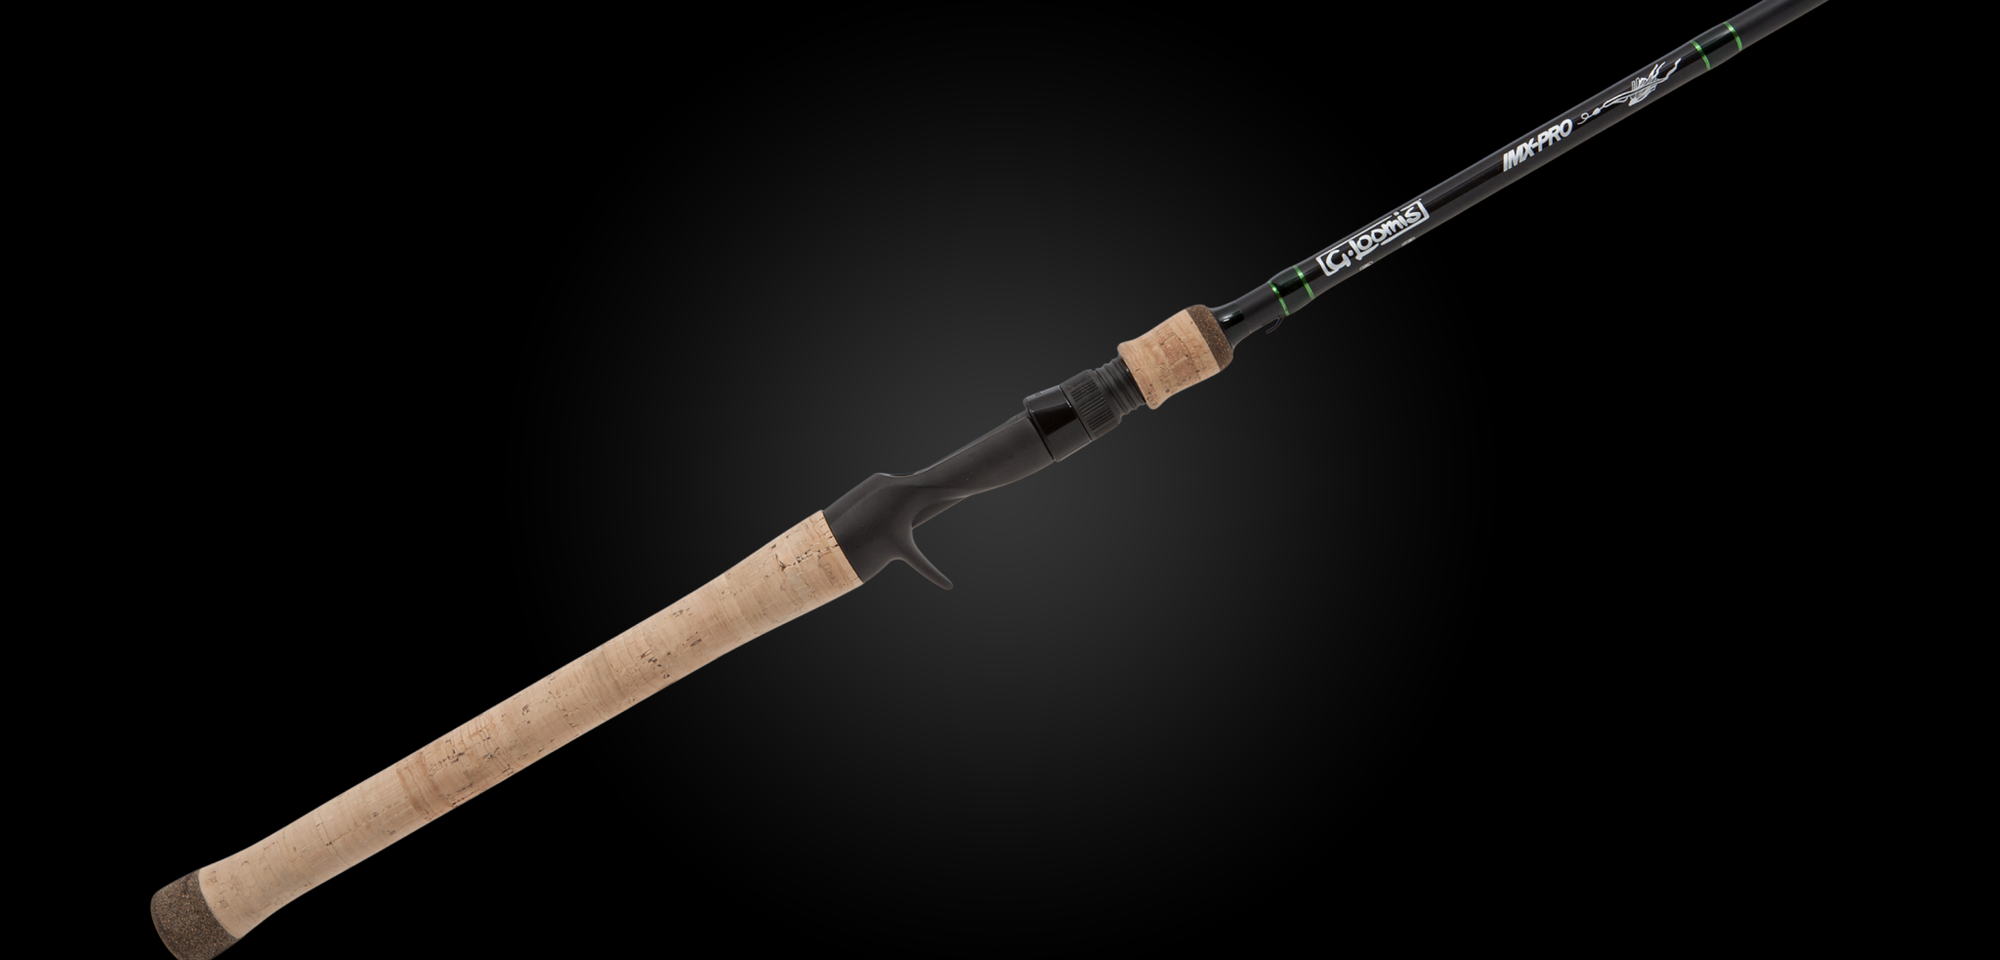 G. Loomis IMX-PRO OFFSHORE 96-30 Conventional Rod - 12917-01 - Melton Tackle